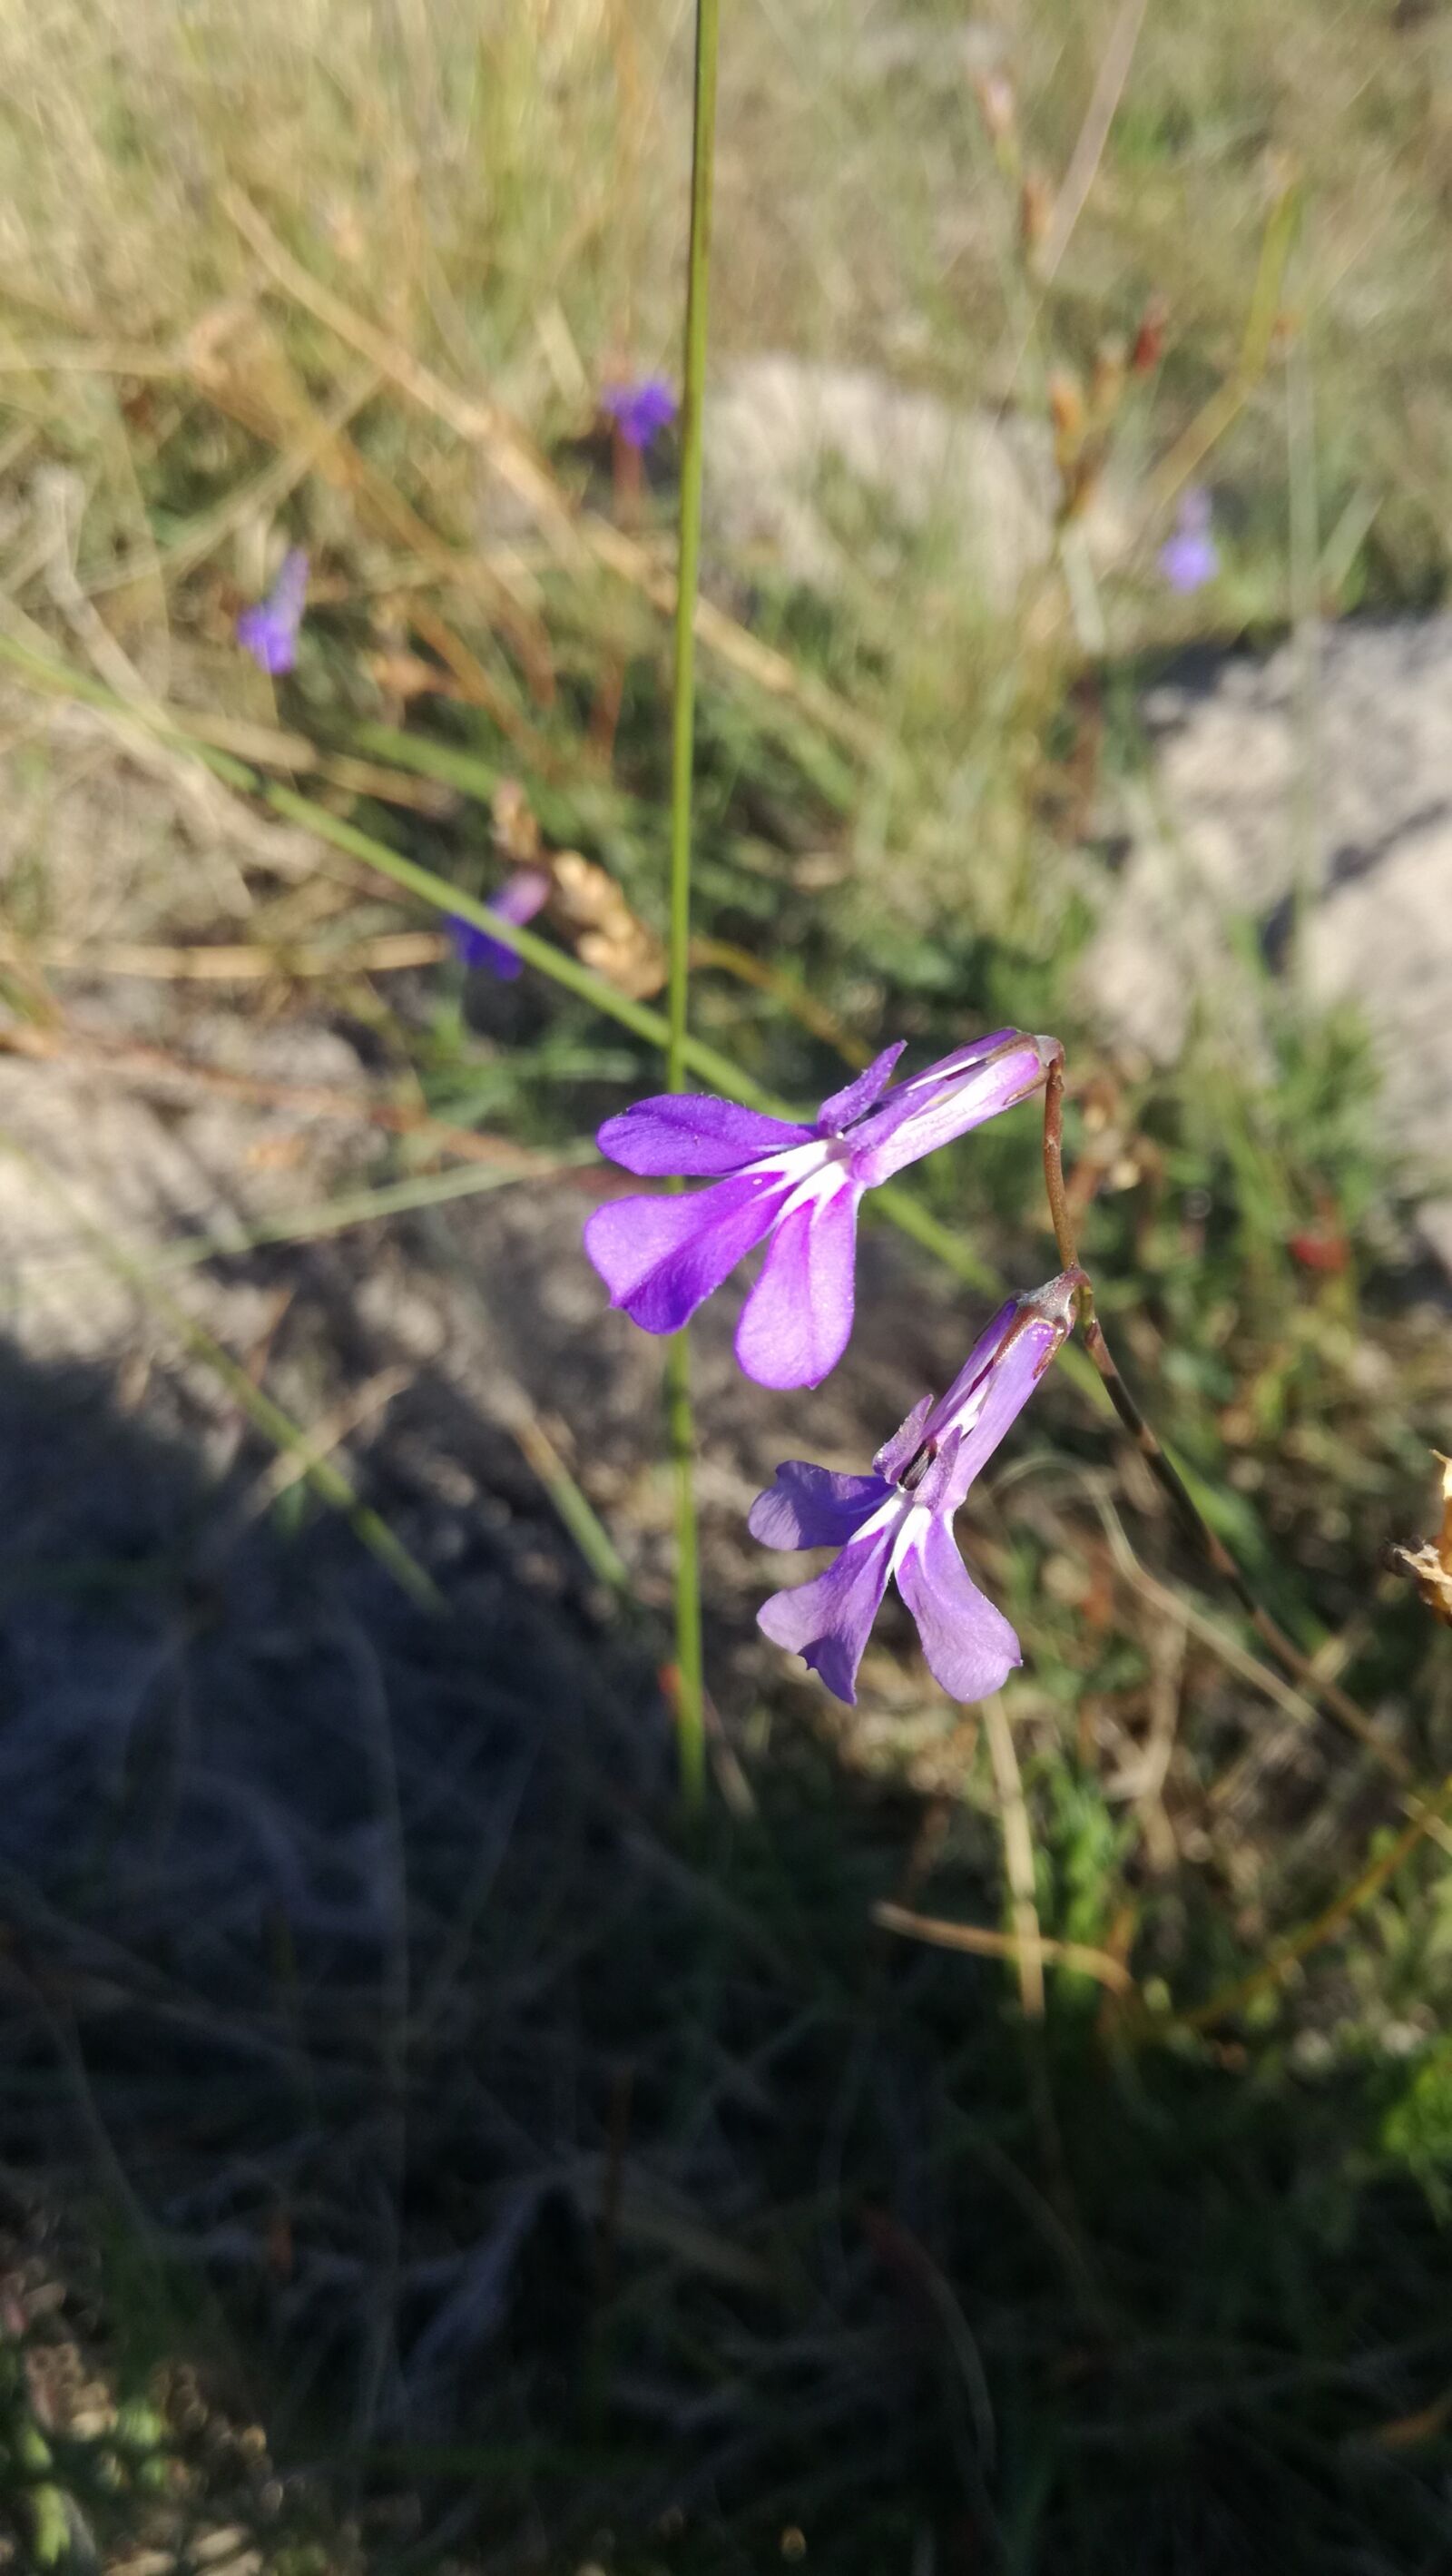 HUAWEI P9 LITE sample photo. Wildflower, outdoor, nature photography